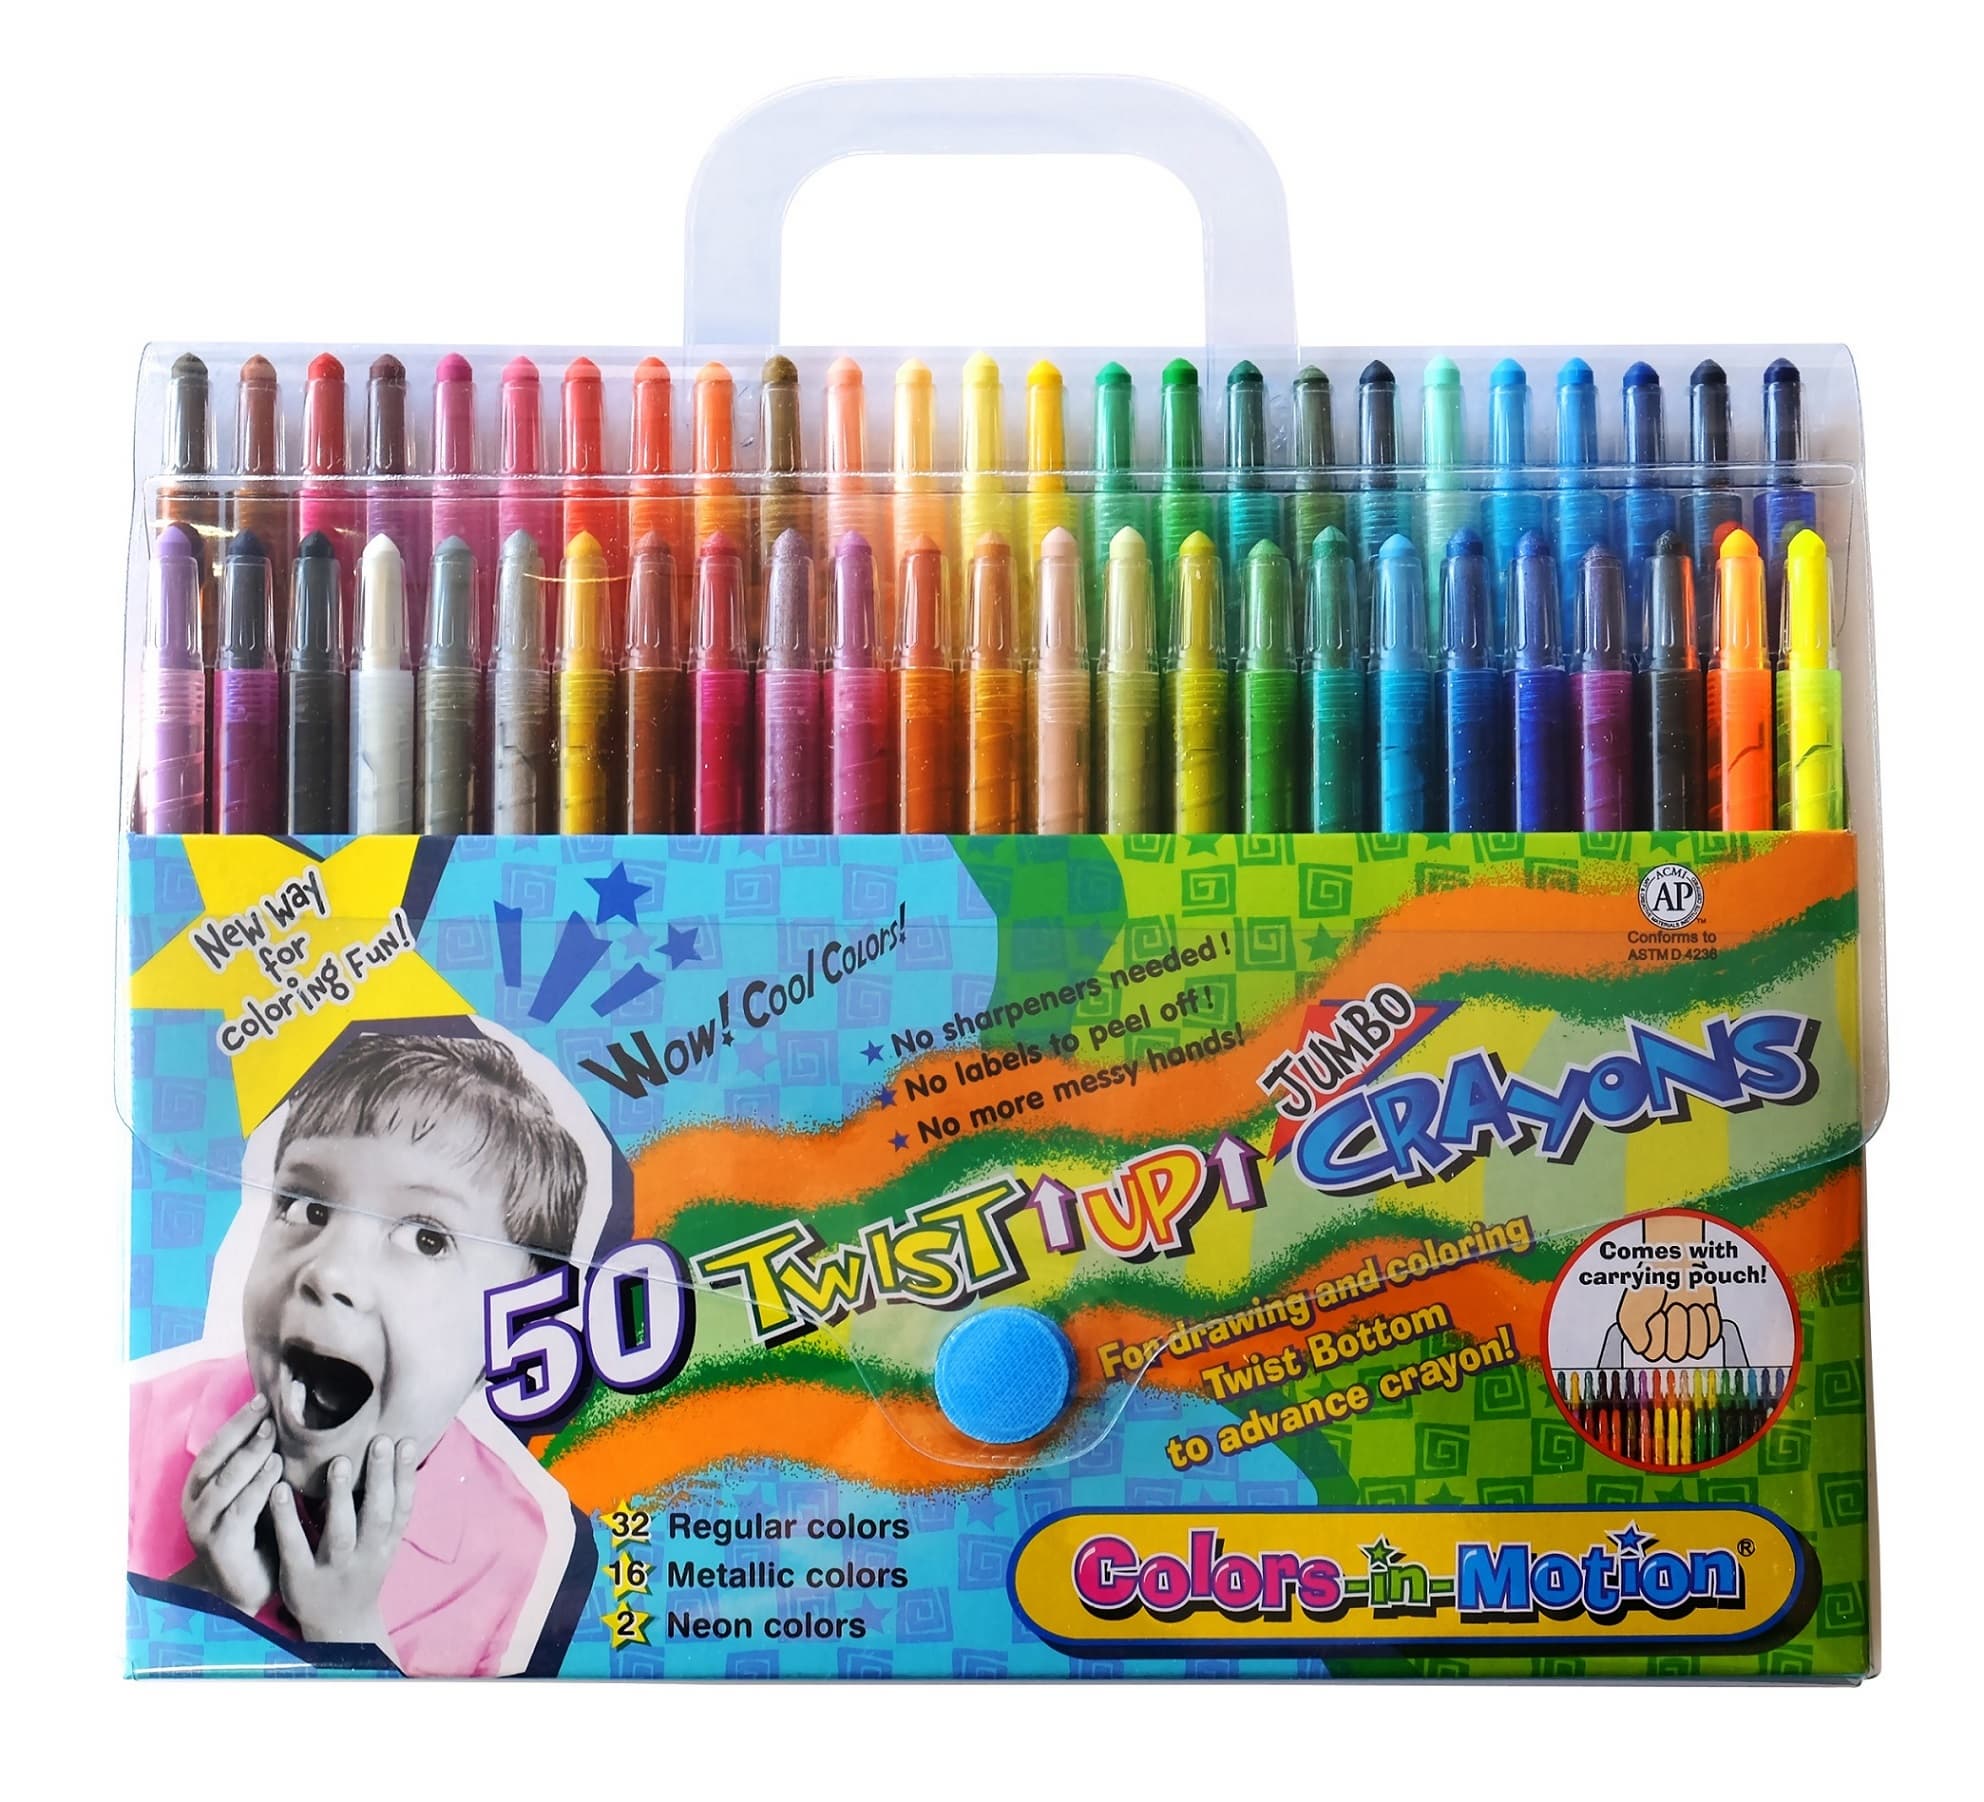 Lakeshore 8-Color Jumbo Crayons - Student Pack